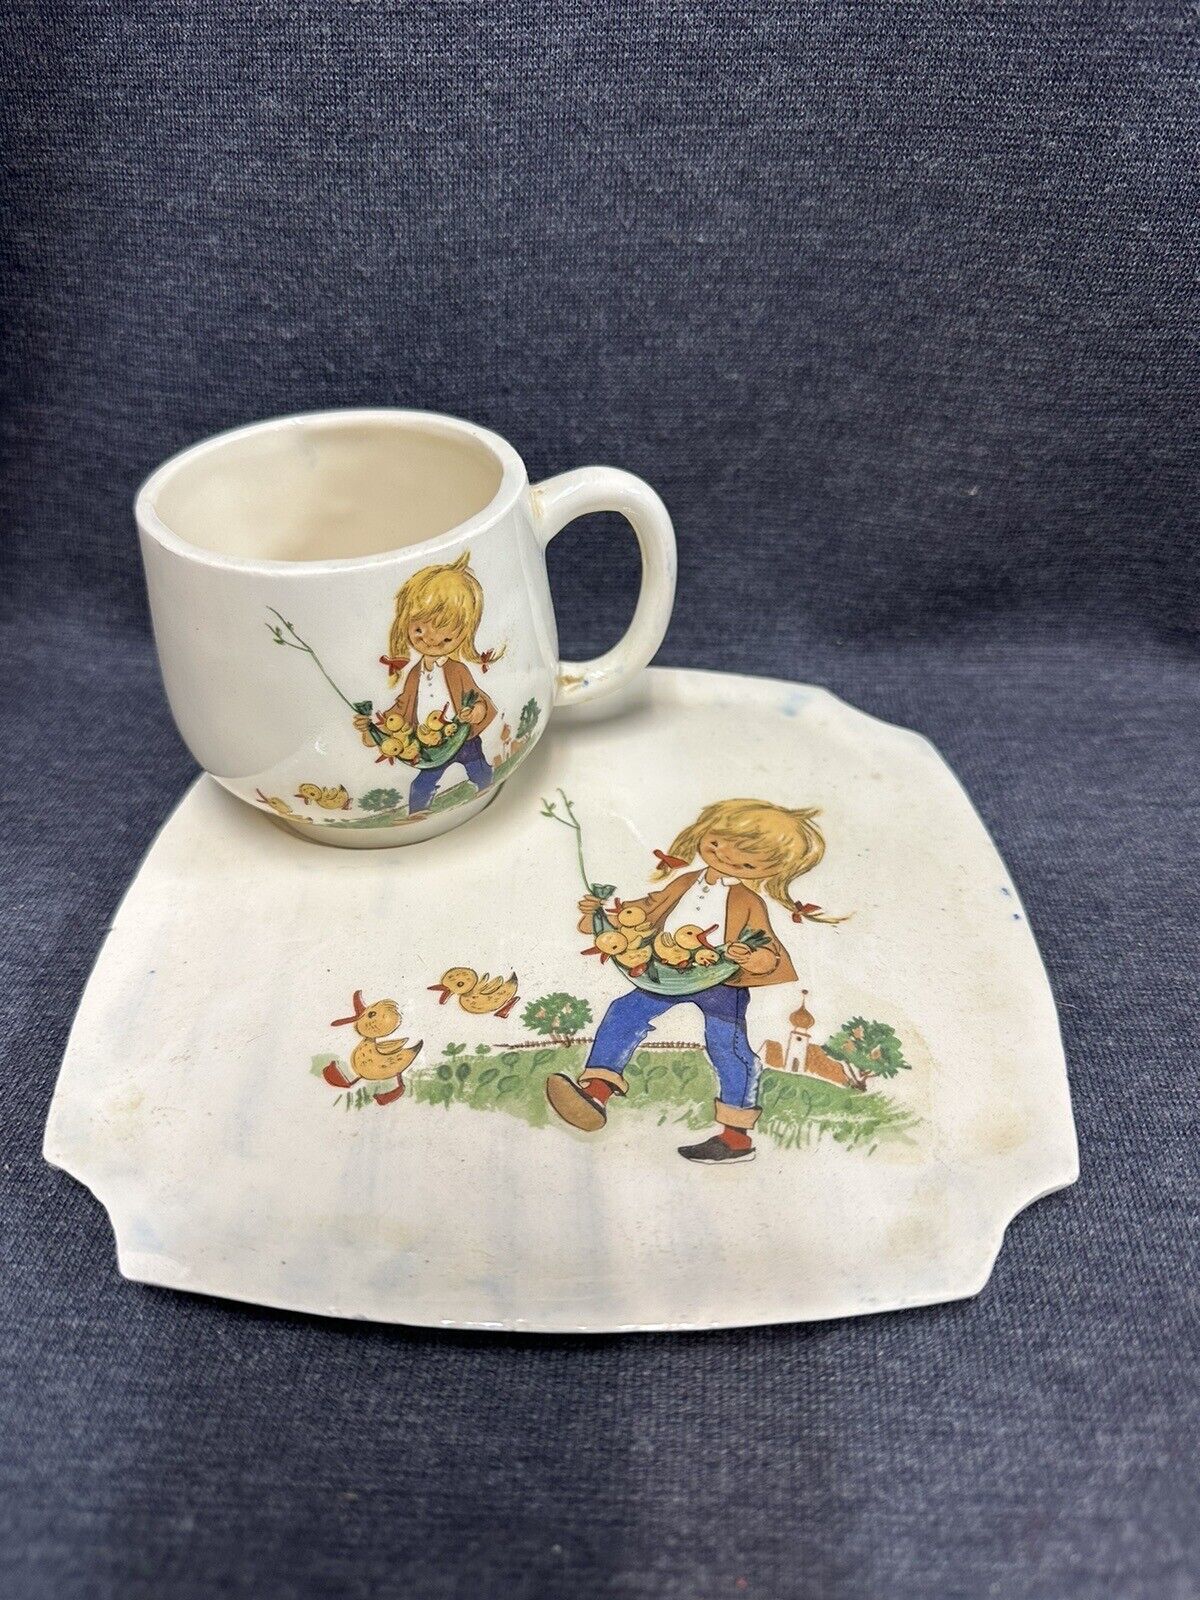 Vintage Ceramic Childs 2 piece Dinner Set with Cup and 6 3/8” Diameter Plate - $6.93